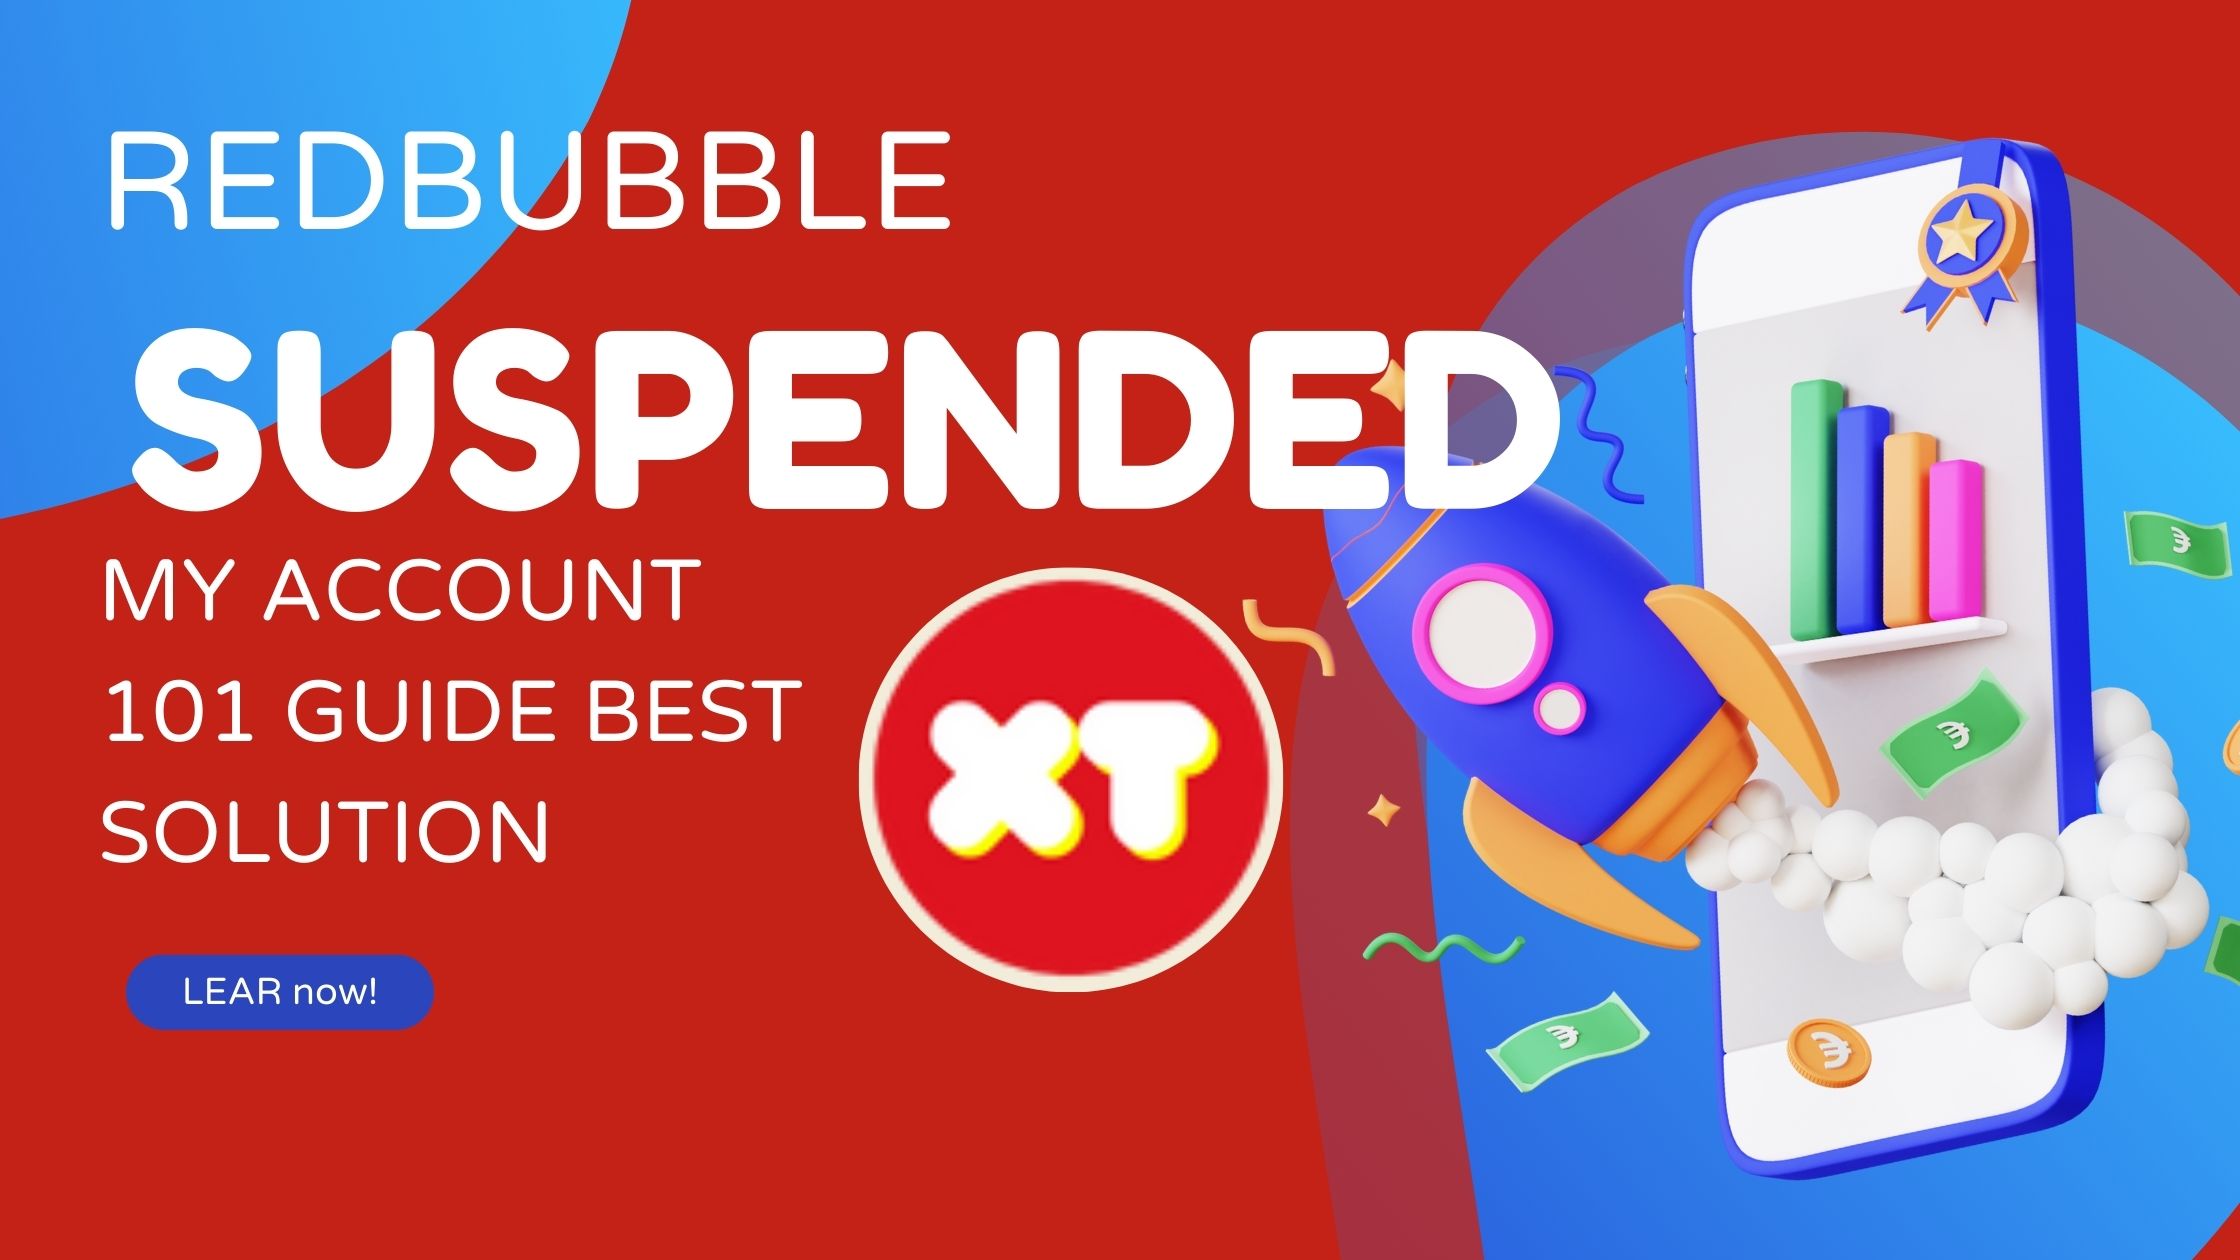 Redbubble Suspended my Account 101 Guide Best Solution